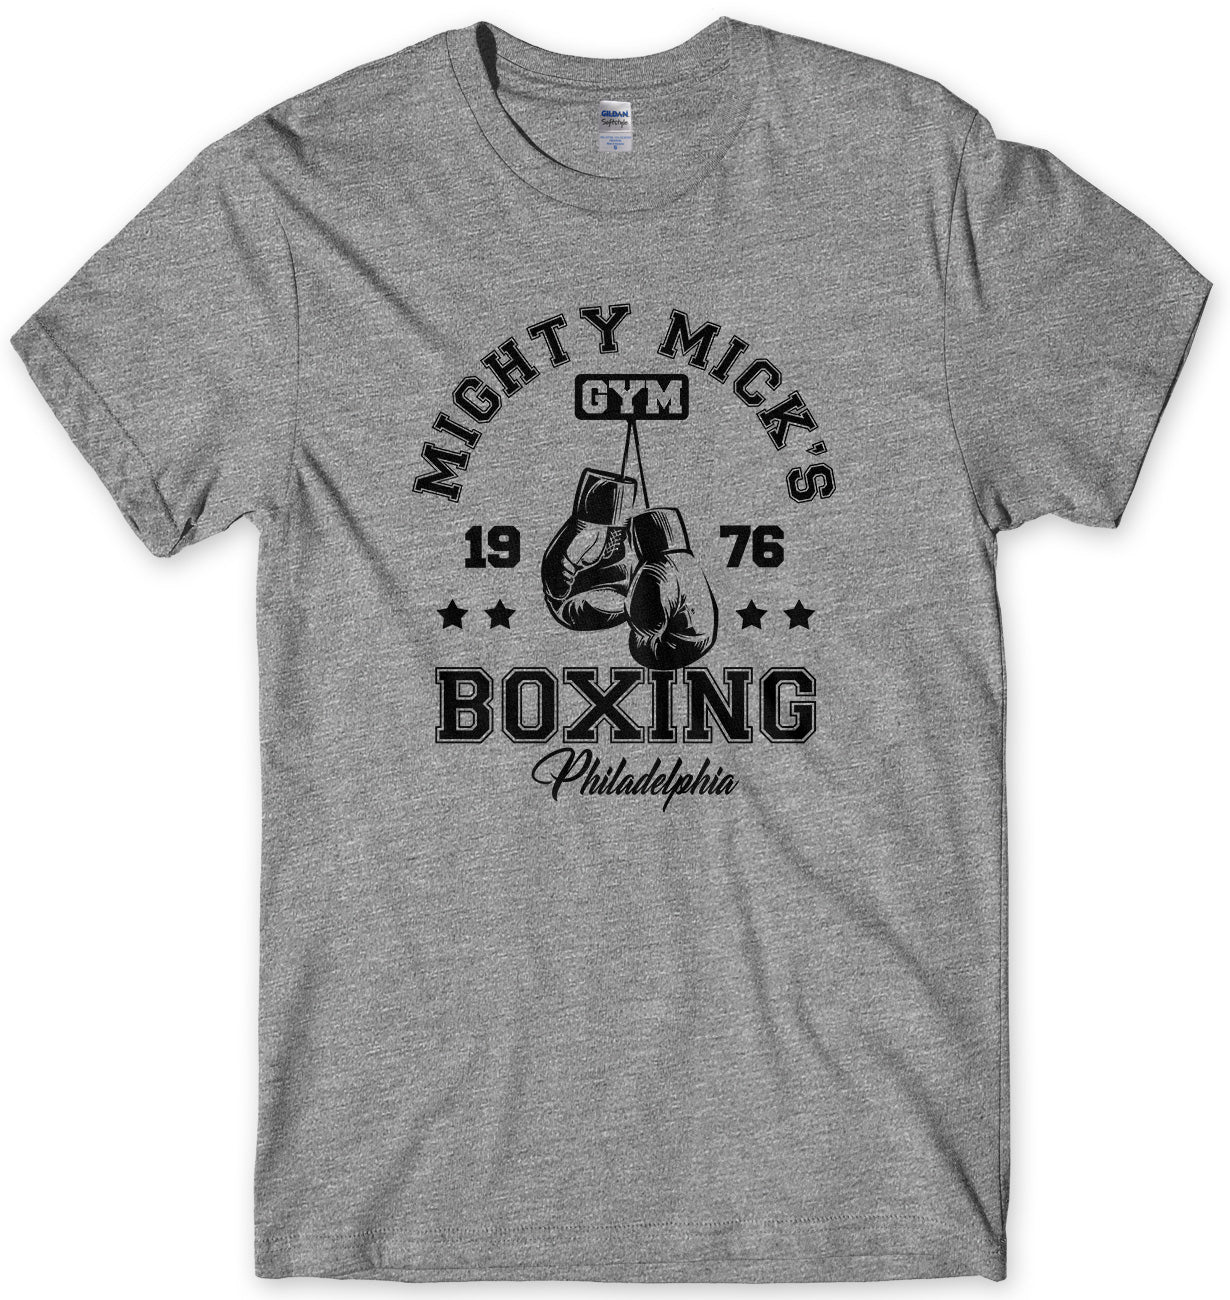 MIGHTY MICK'S BOXING - INSPIRED BY ROCKY MENS UNISEX T-SHIRT